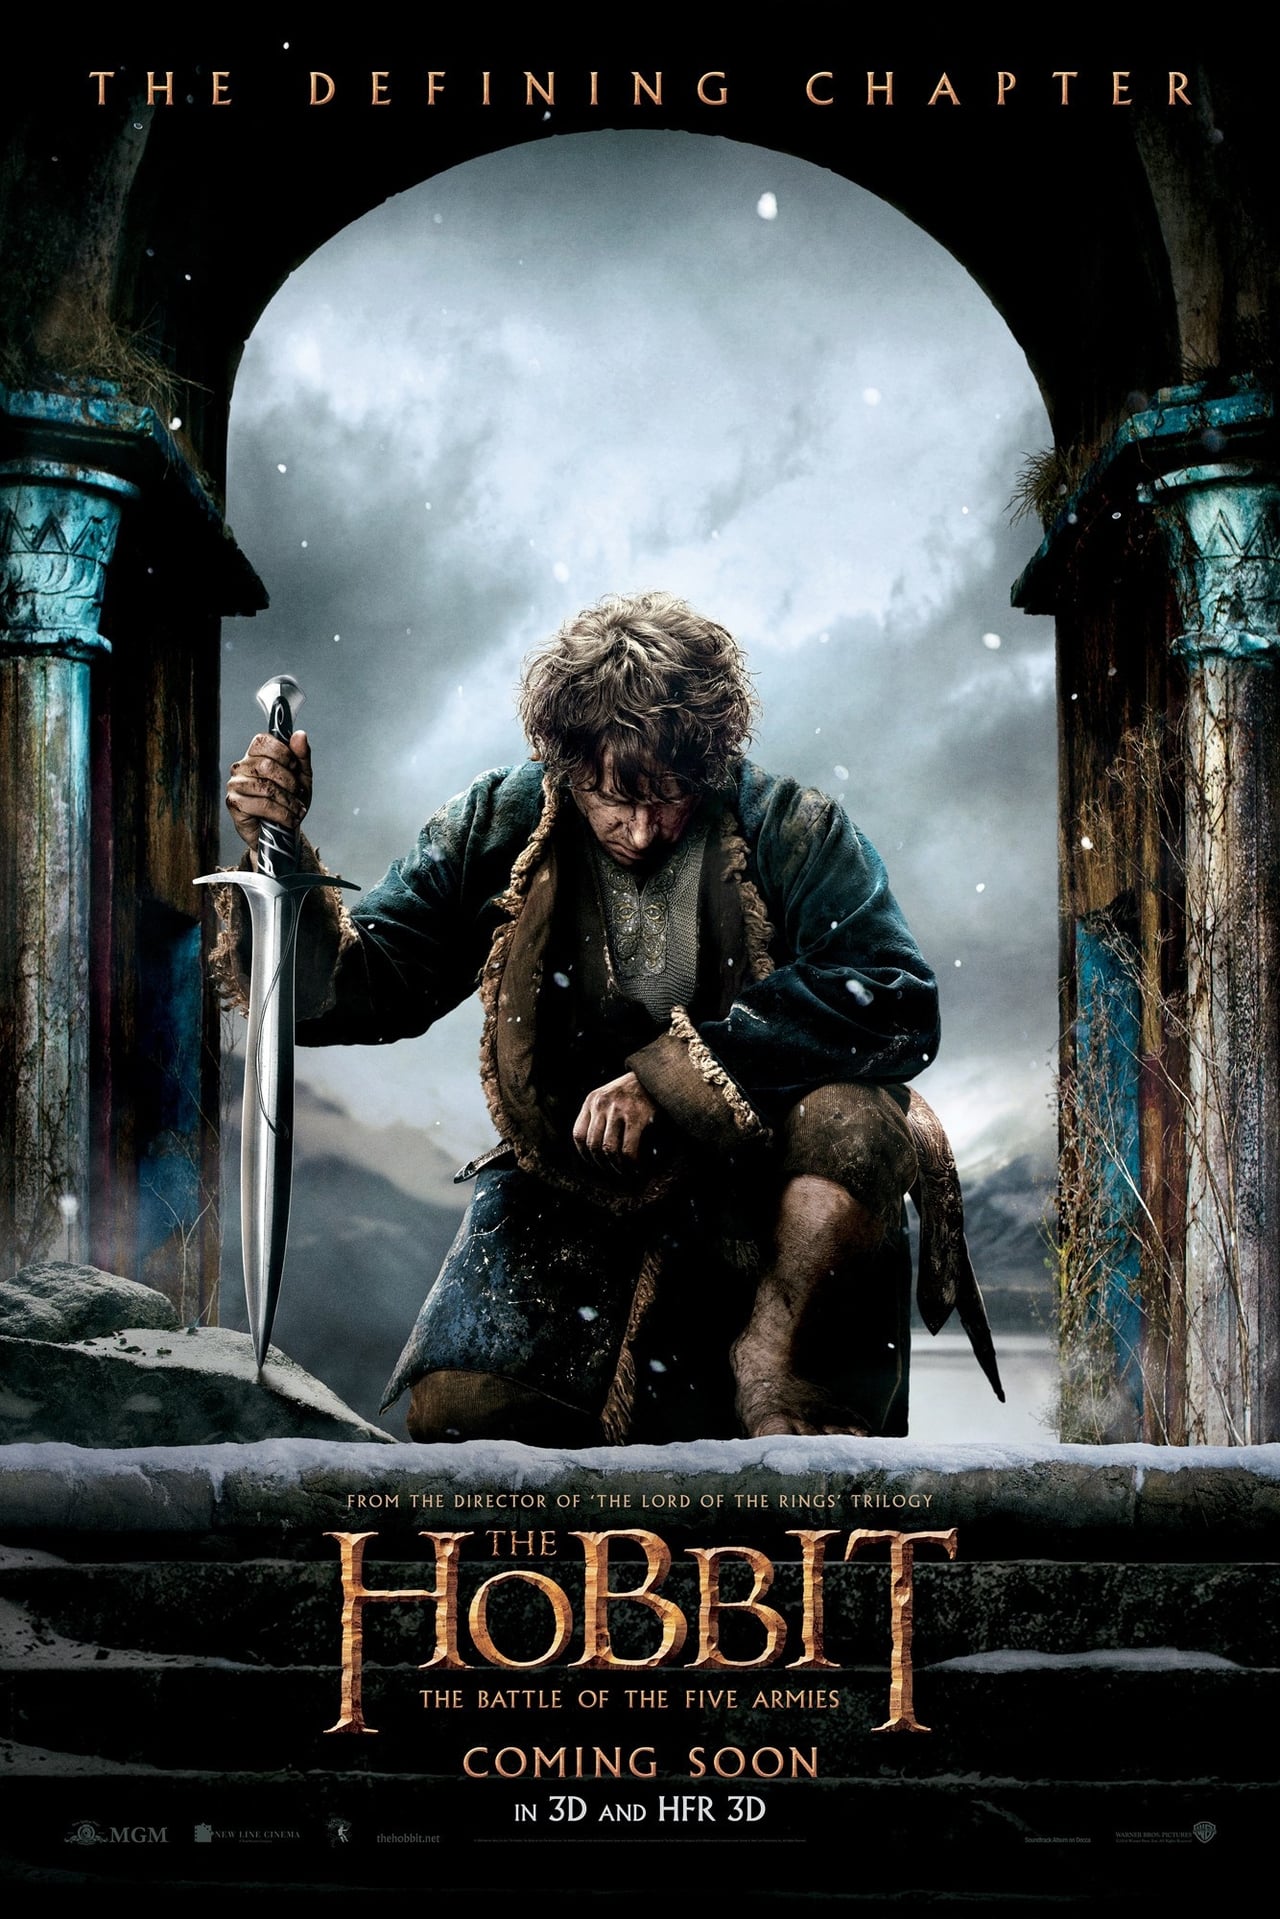 The Hobbit: The Battle of the Five Armies (2014) Theatrical Cut 768Kbps 23.976Fps 48Khz 5.1Ch BluRay Turkish Audio TAC